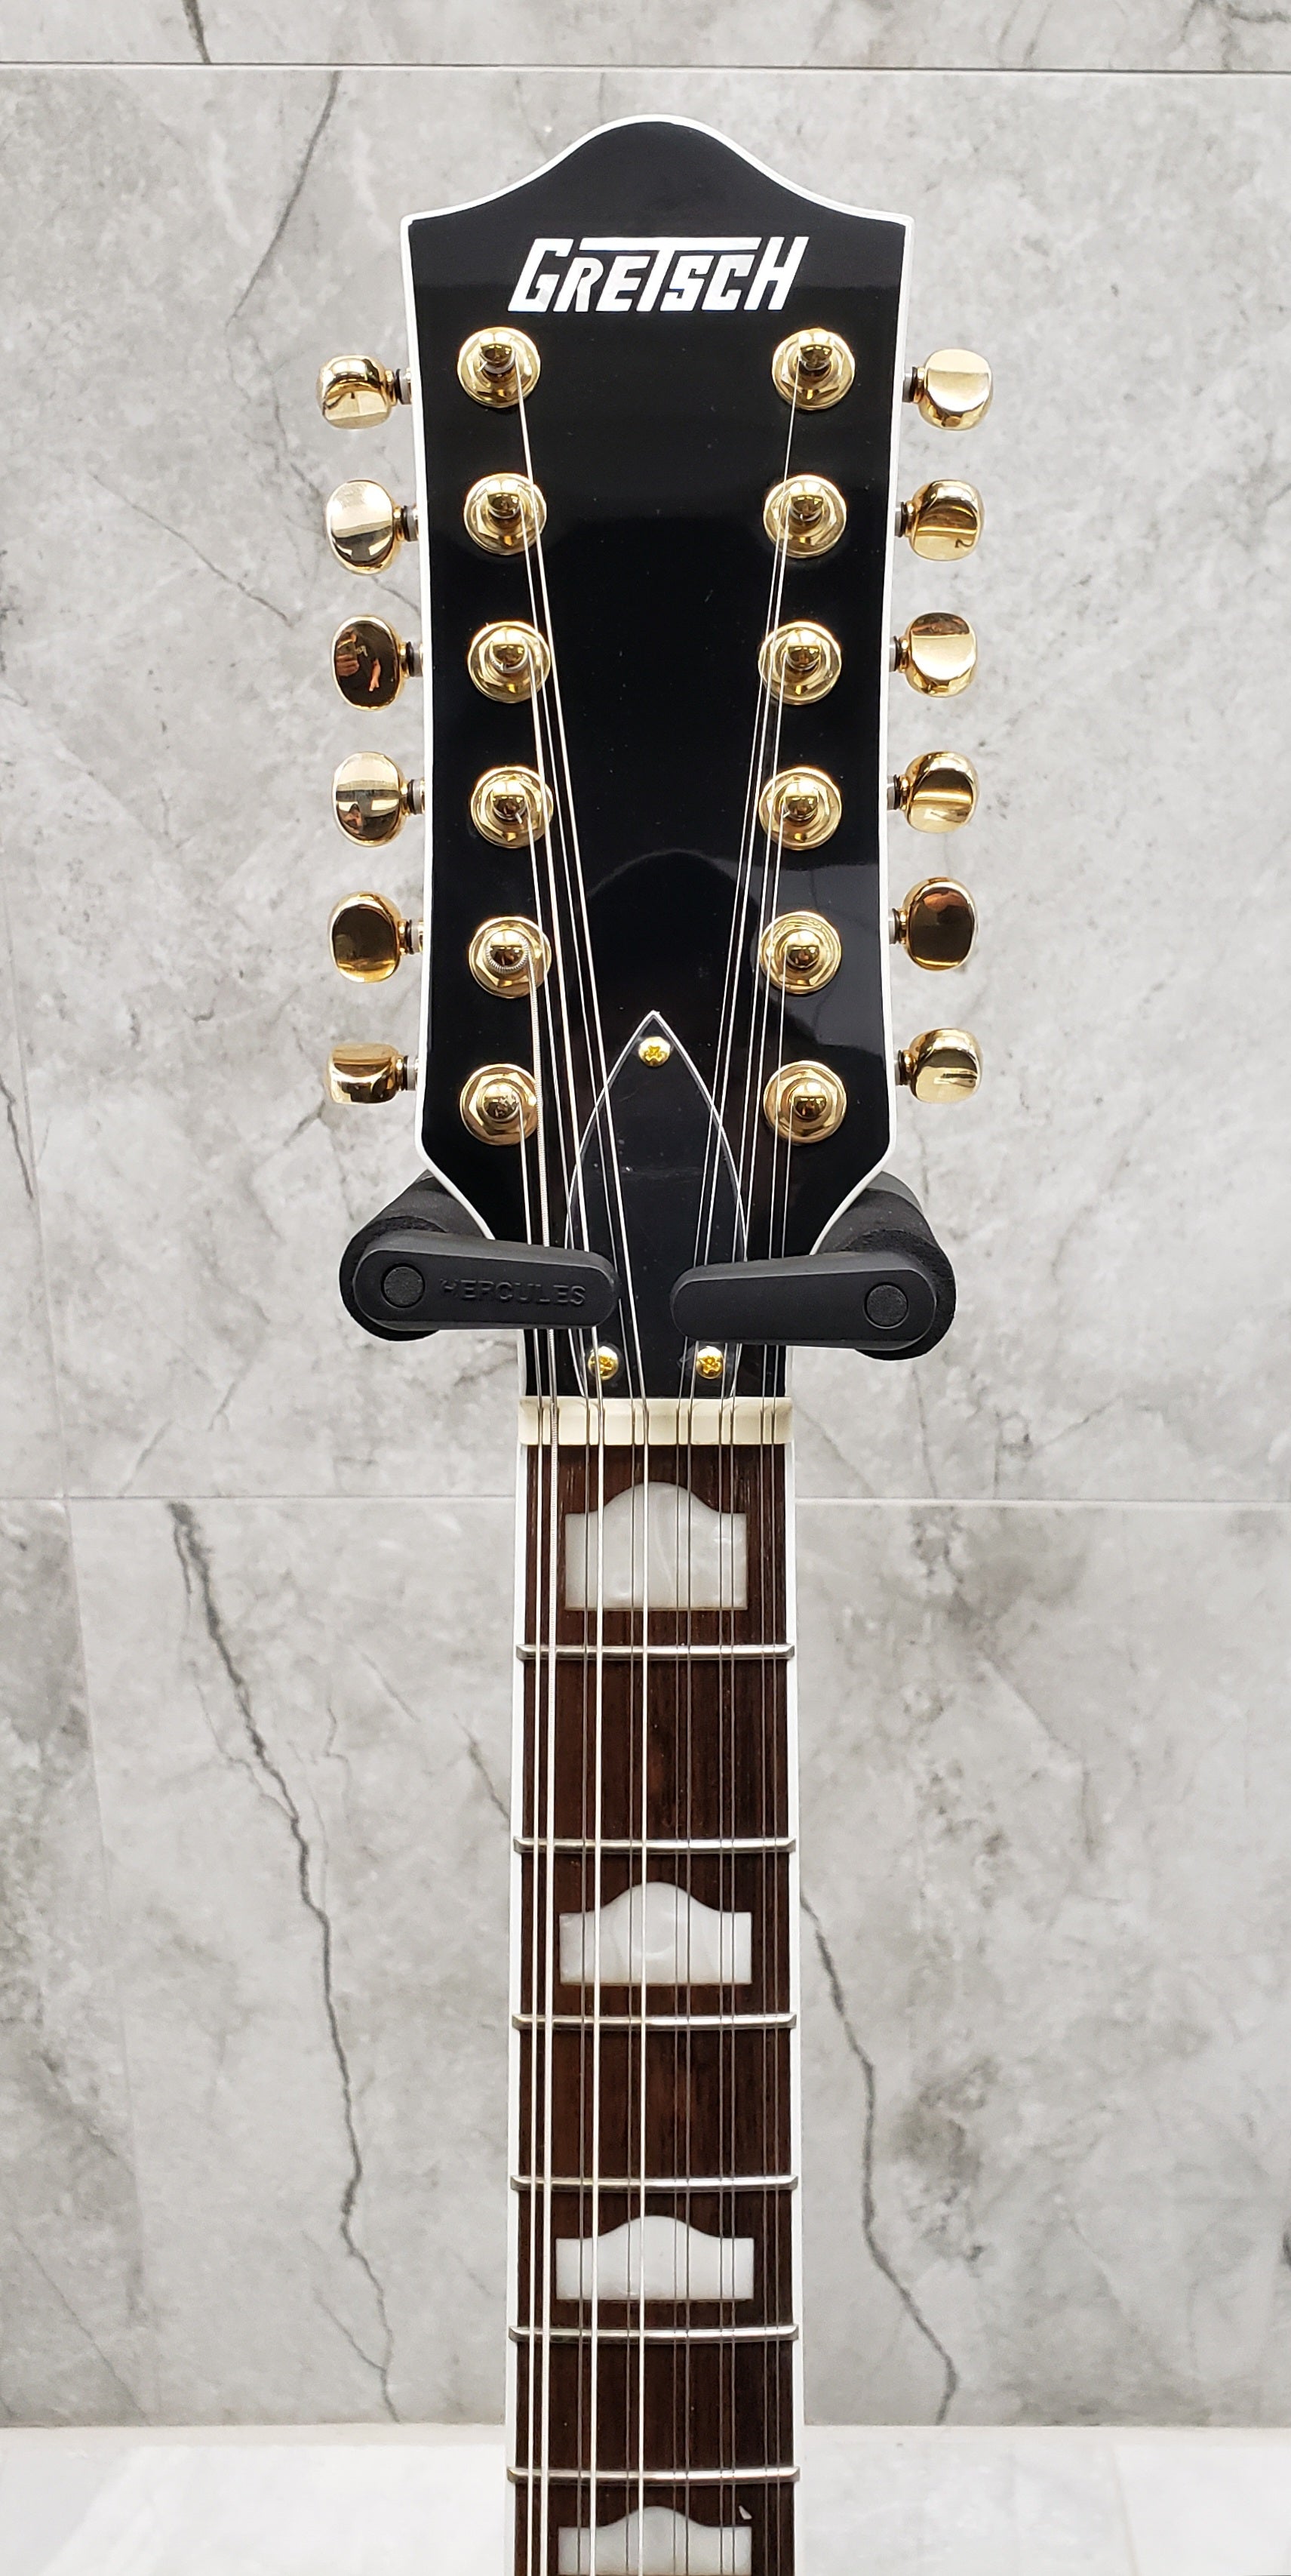 GRETSCH G5422G-12 Electromatic Classic Hollow Body Double-Cut 12 String with Gold Hardware Single Barrel Burst 2516319593 SERIAL NUMBER CYGC22061200 - 7.6 LBS